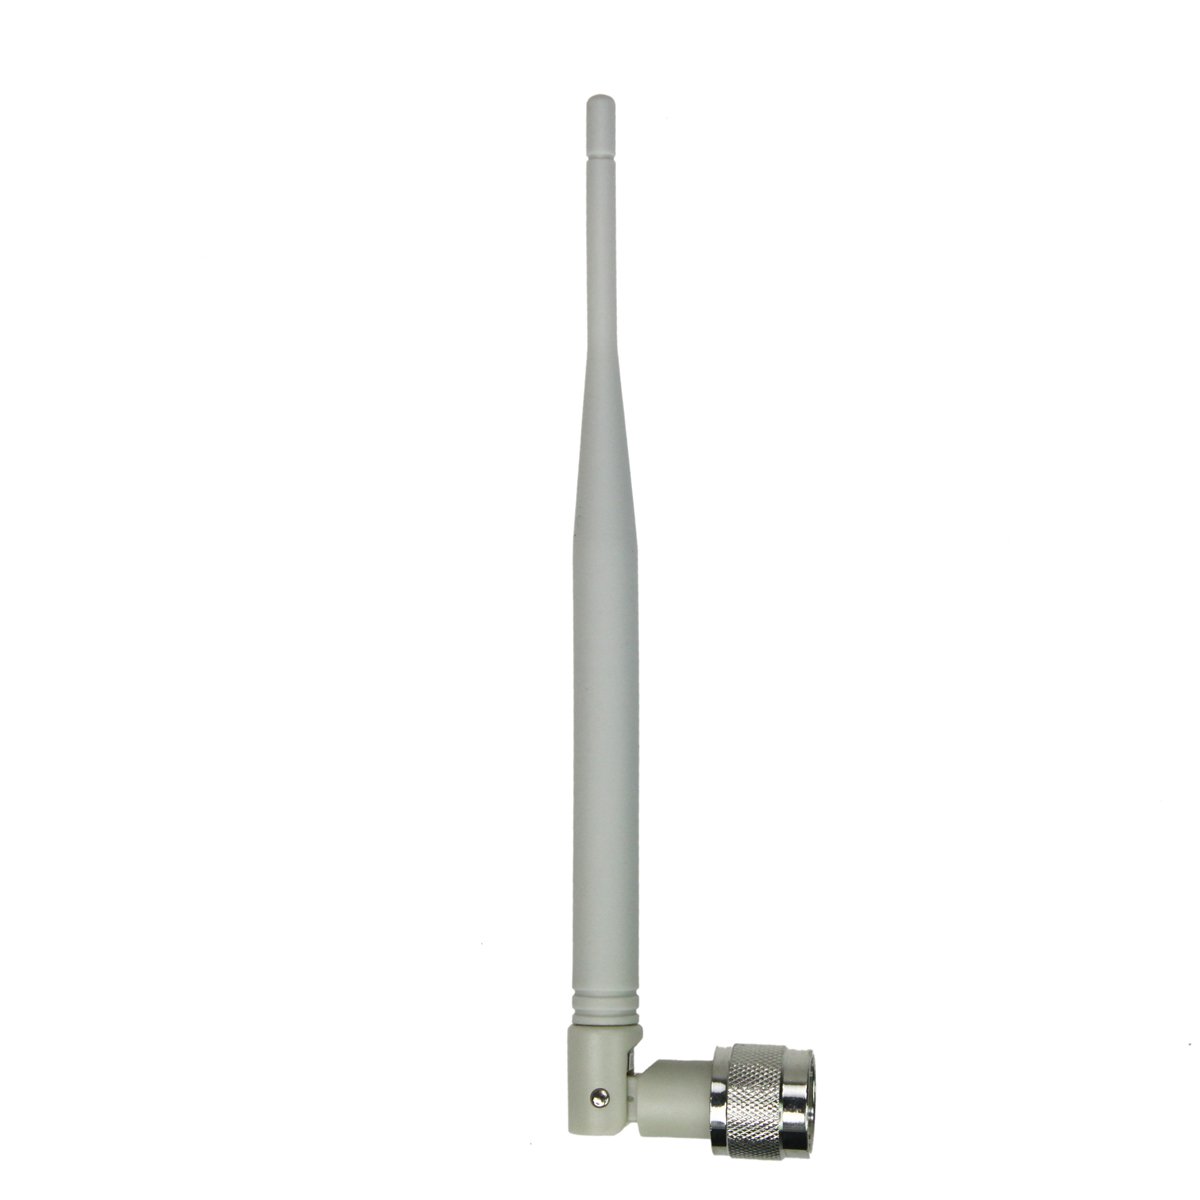 All Networks Pro Mobile Signal whip